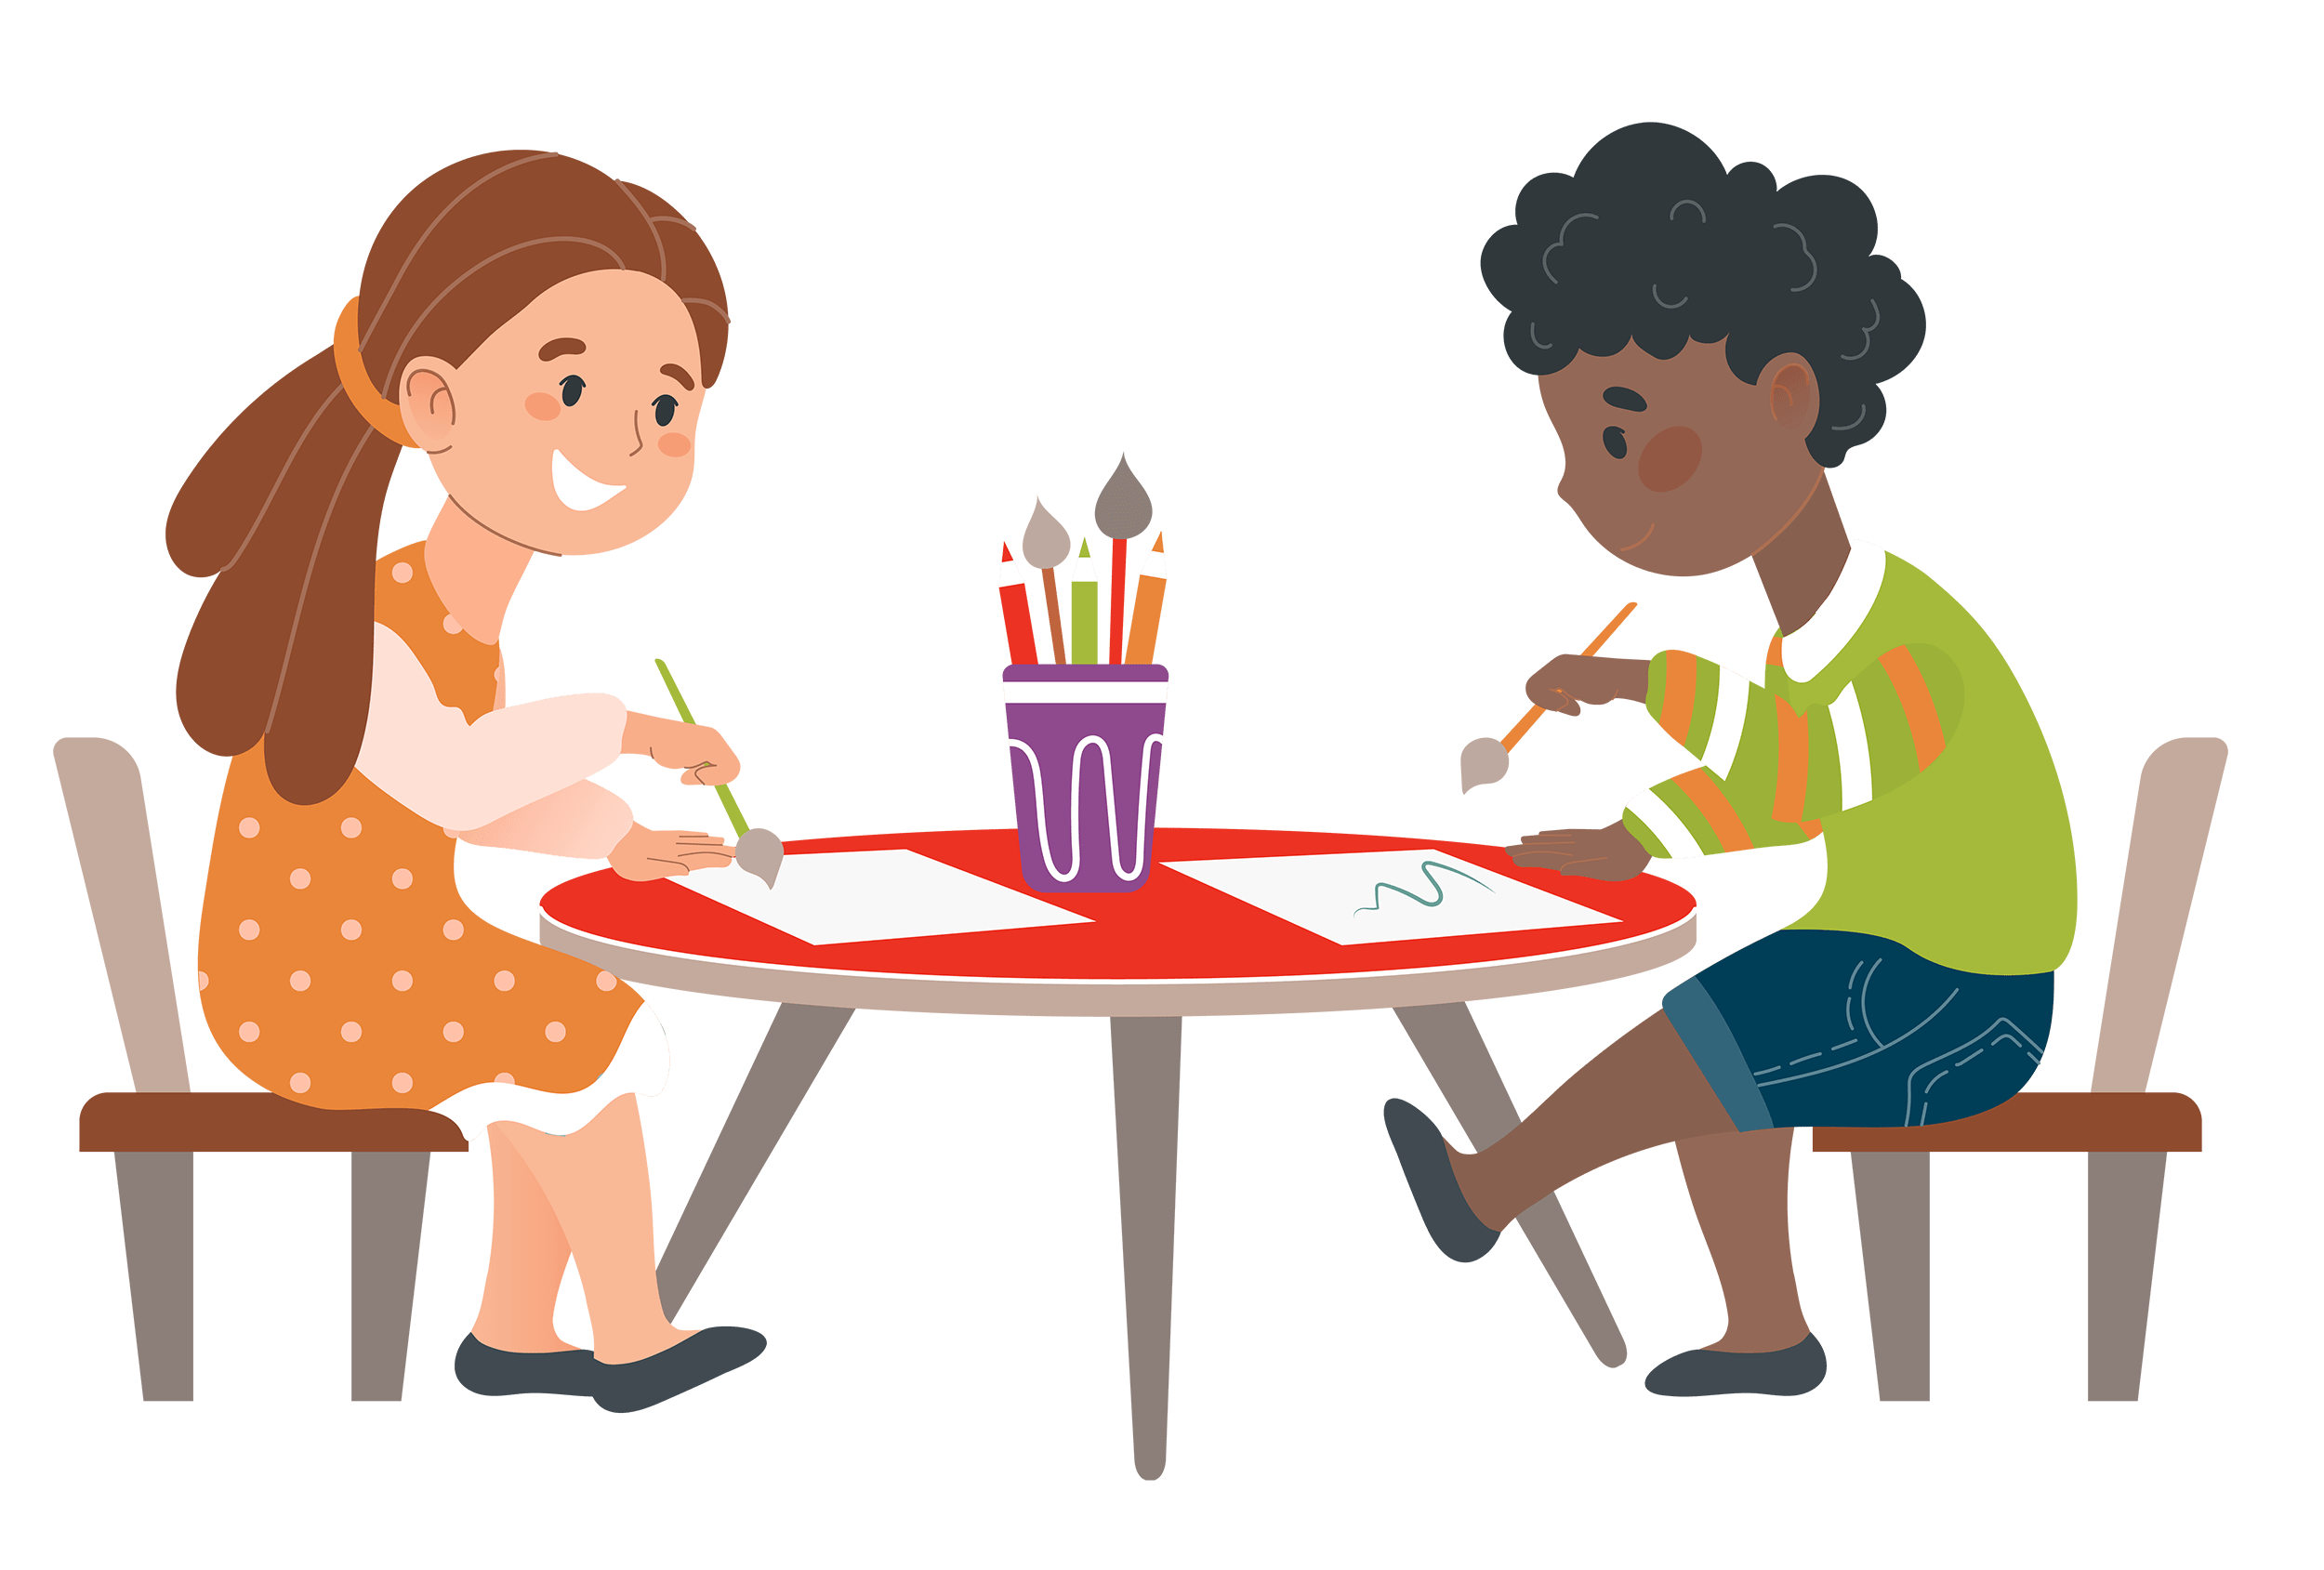 https://kidsstuffacademy.us/wp-content/uploads/2022/05/Girl-and-boy-at-table-03-1.png